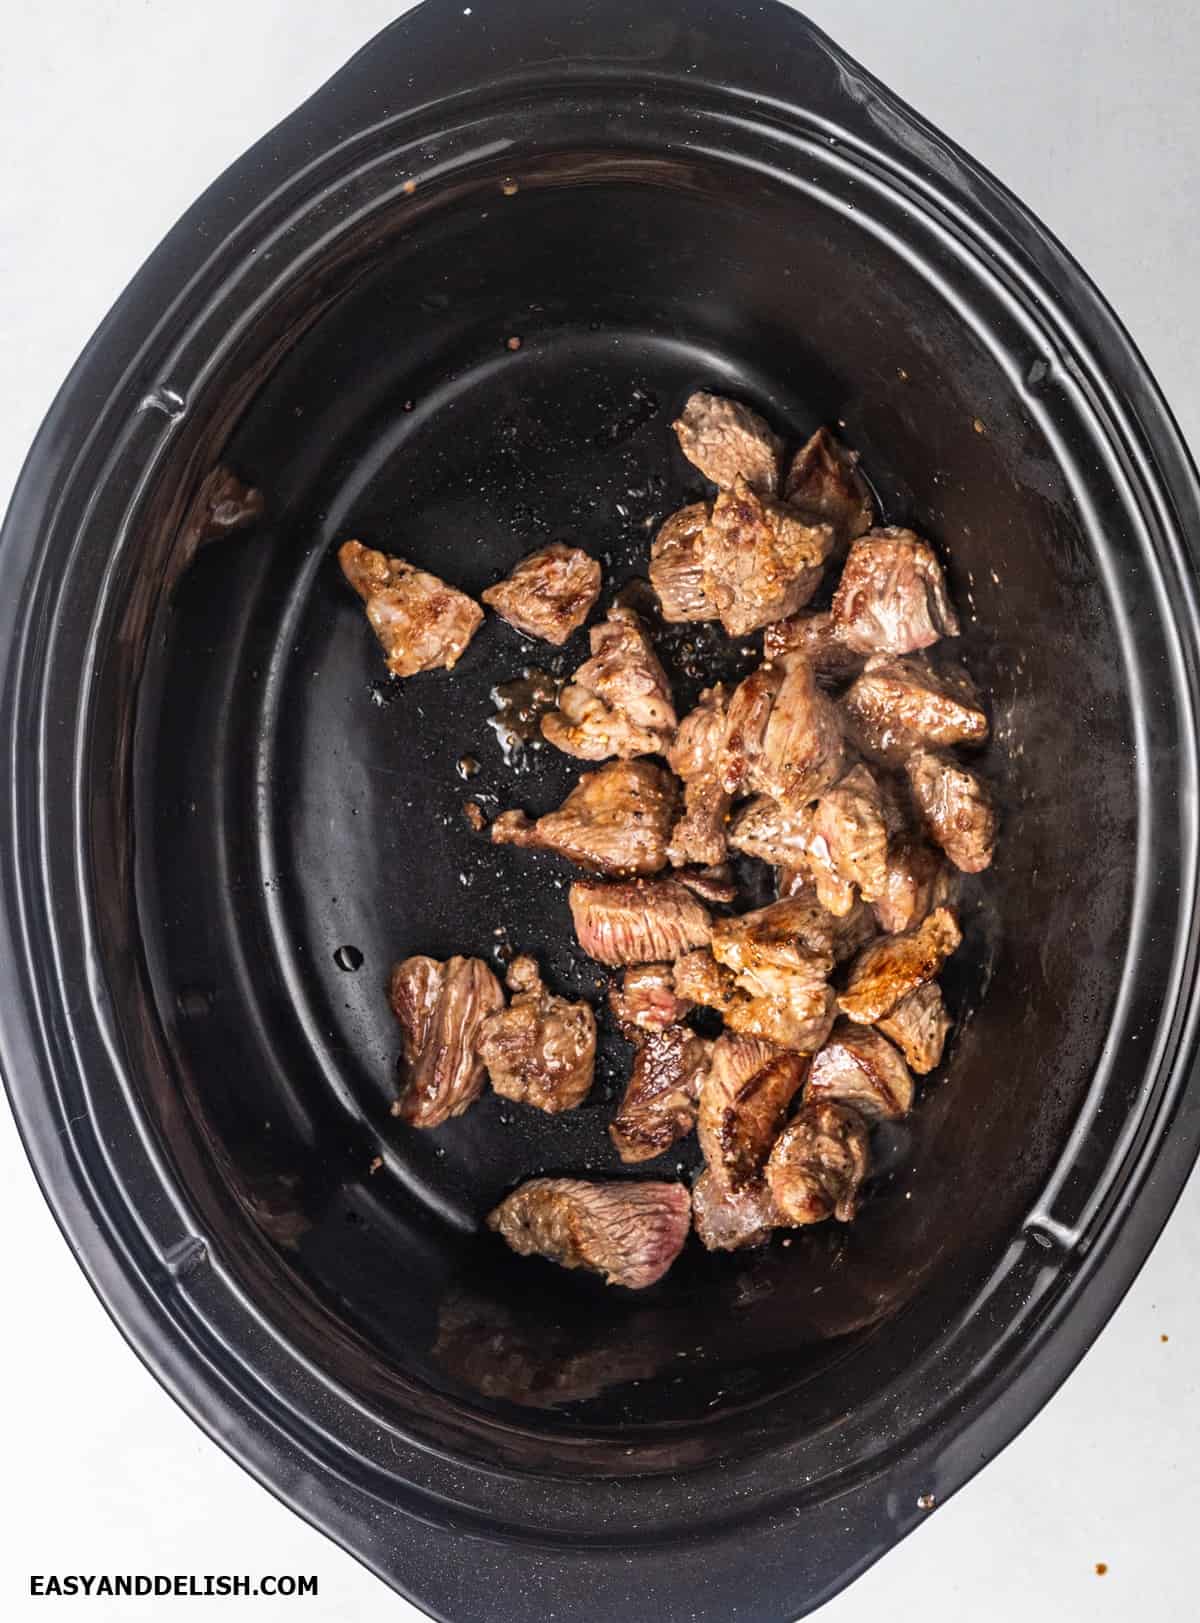 Browned beef chunks in a crockpot.